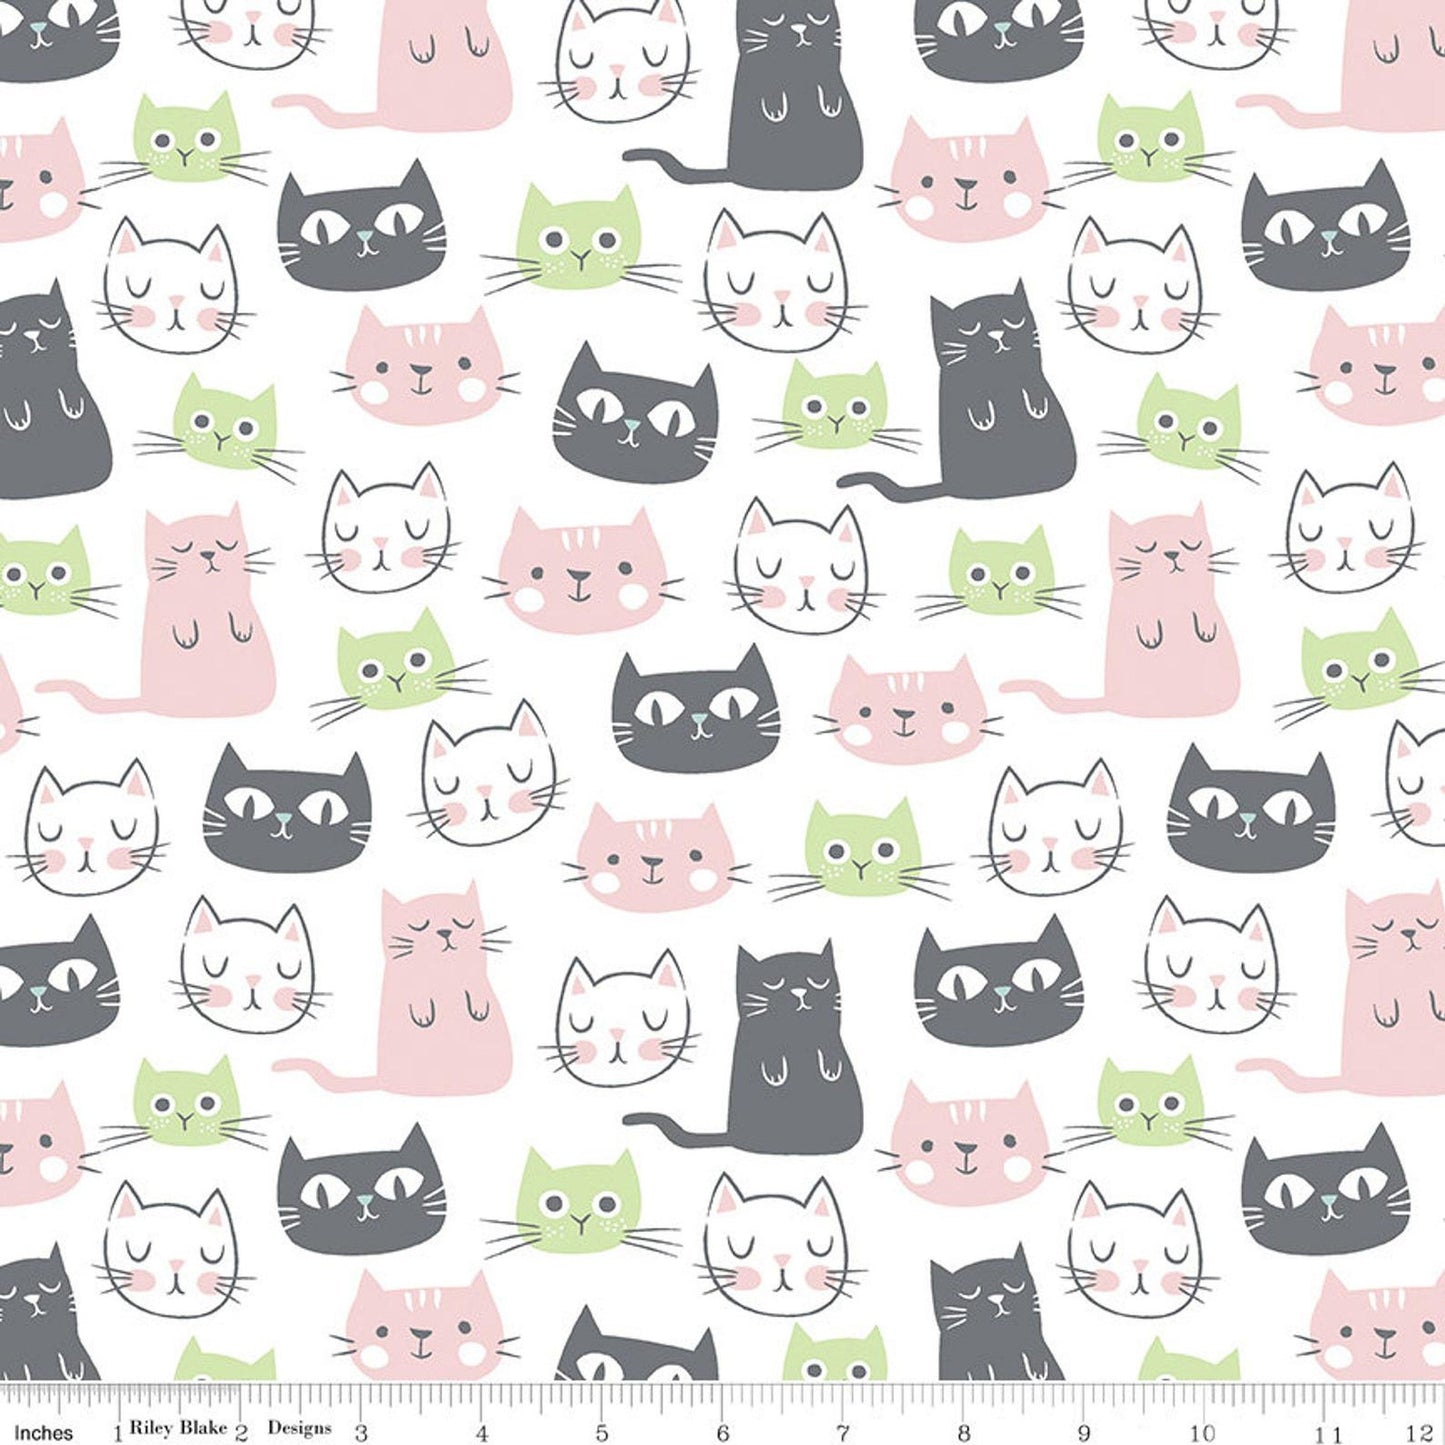 Purrfect Day Main C9900 White - Riley Blake Designs - Cat Cats Kittens Gray Green Pink White - Quilting Cotton Fabric